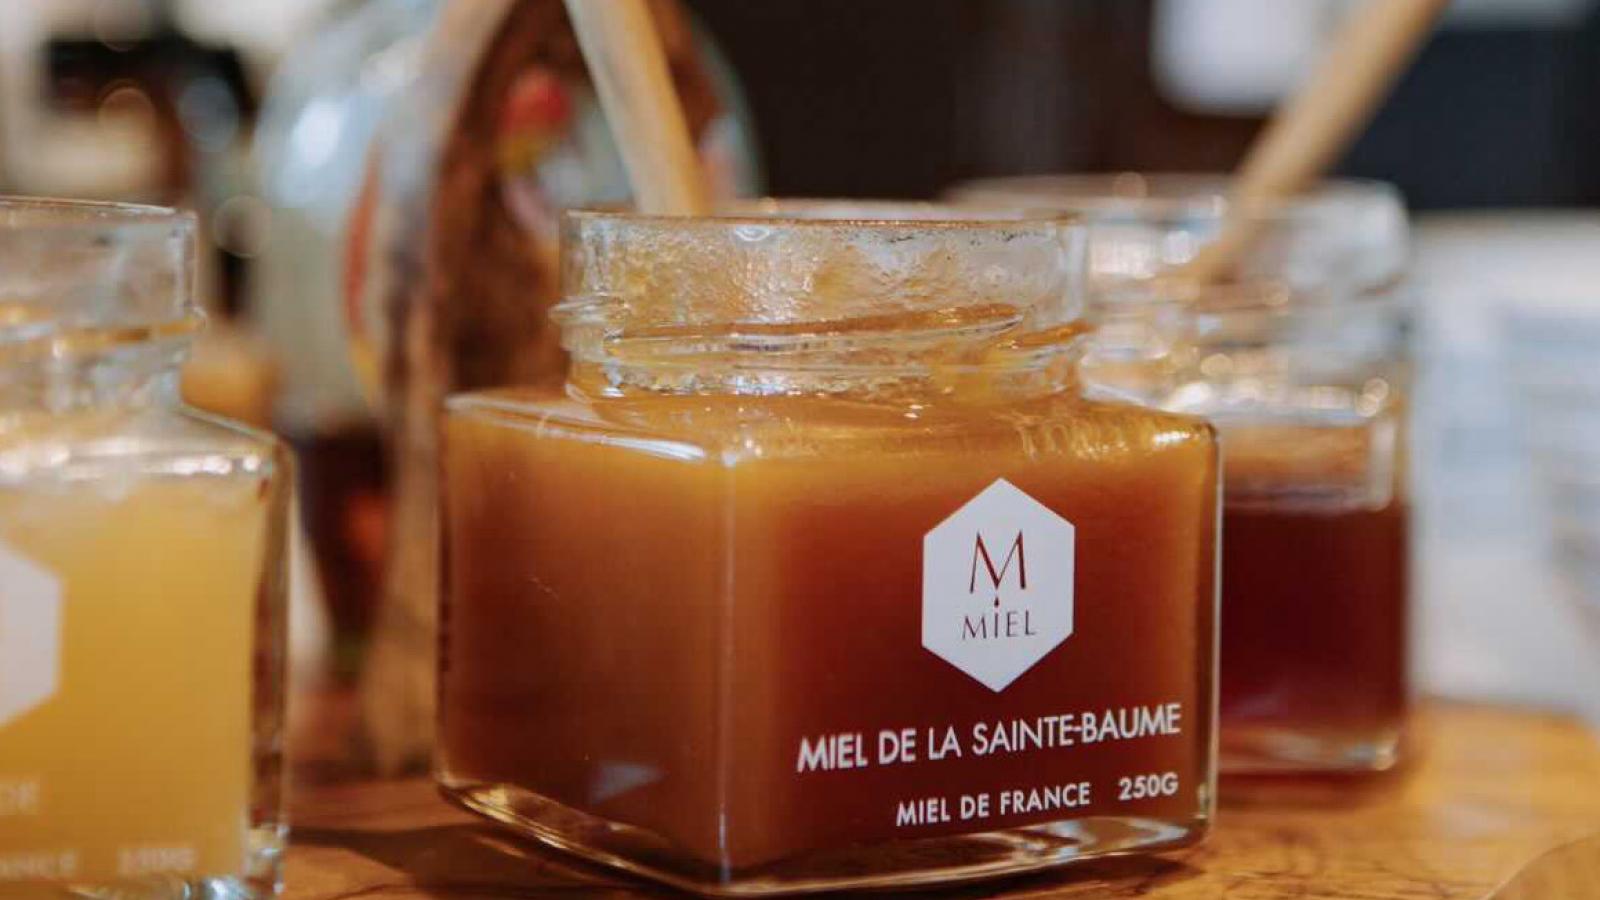 At the Hotel Sezz, we opt for Made in France